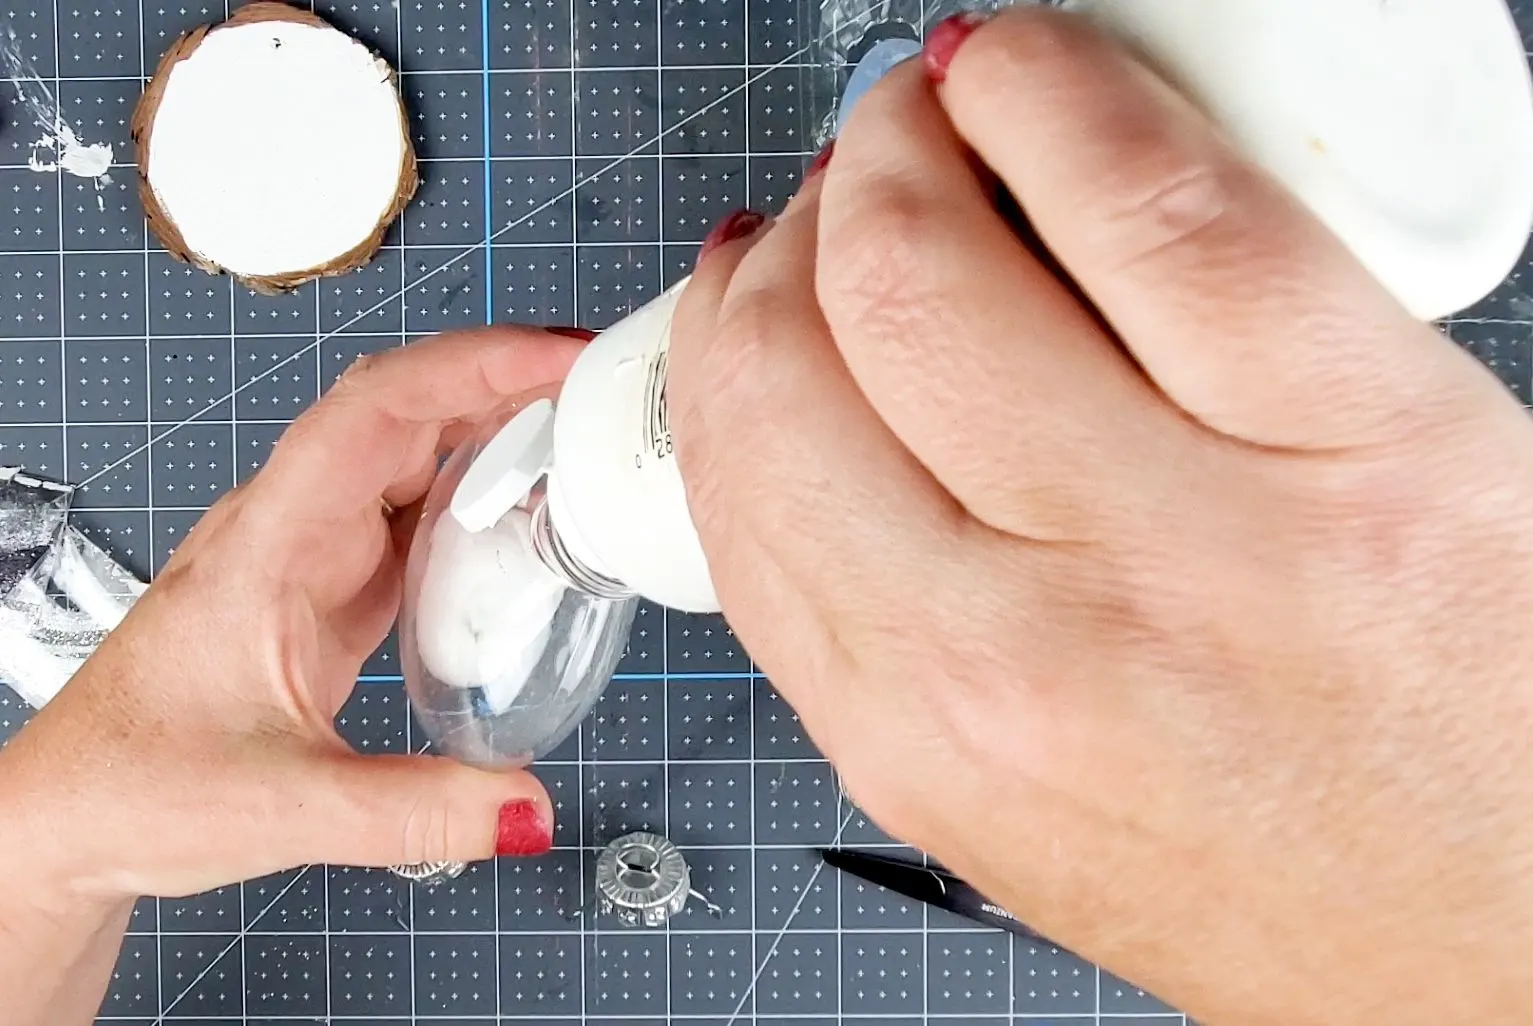 adding paint to bauble ornament